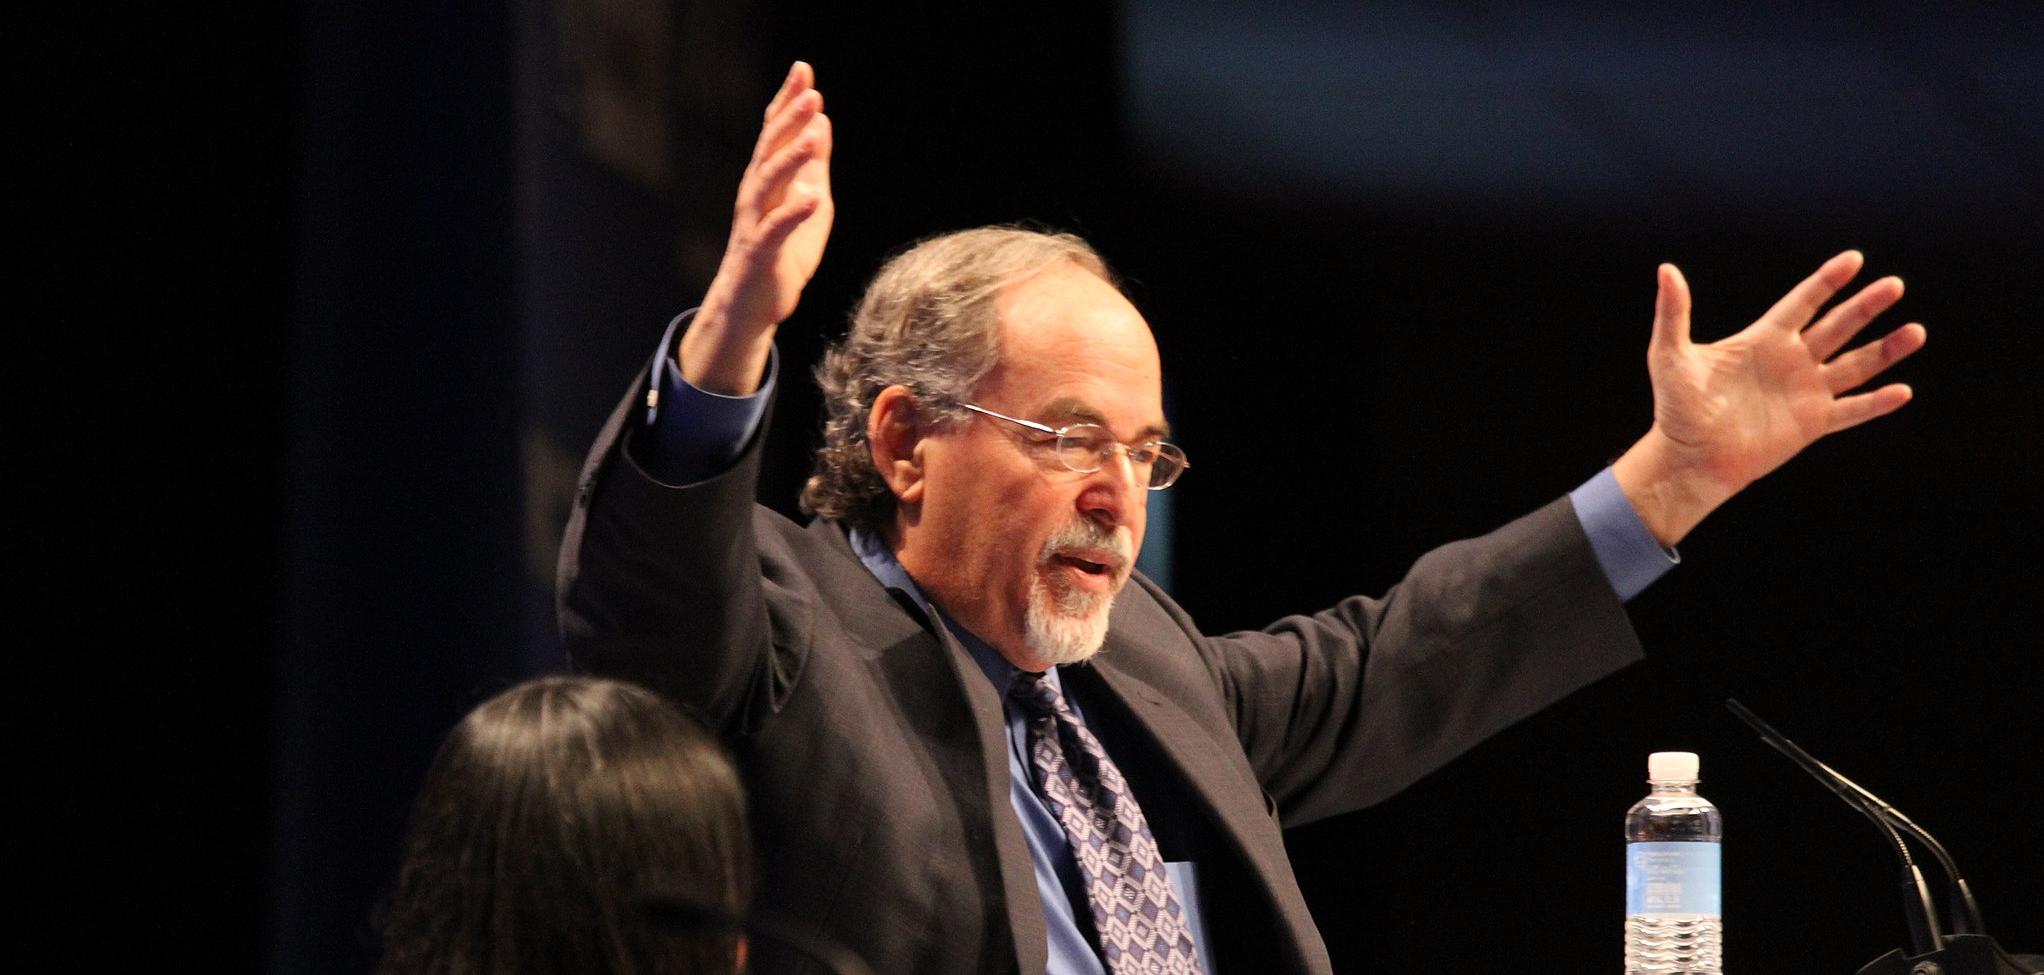 David Horowitz, a white man with his hands raised in the air, in front of a mic stand.